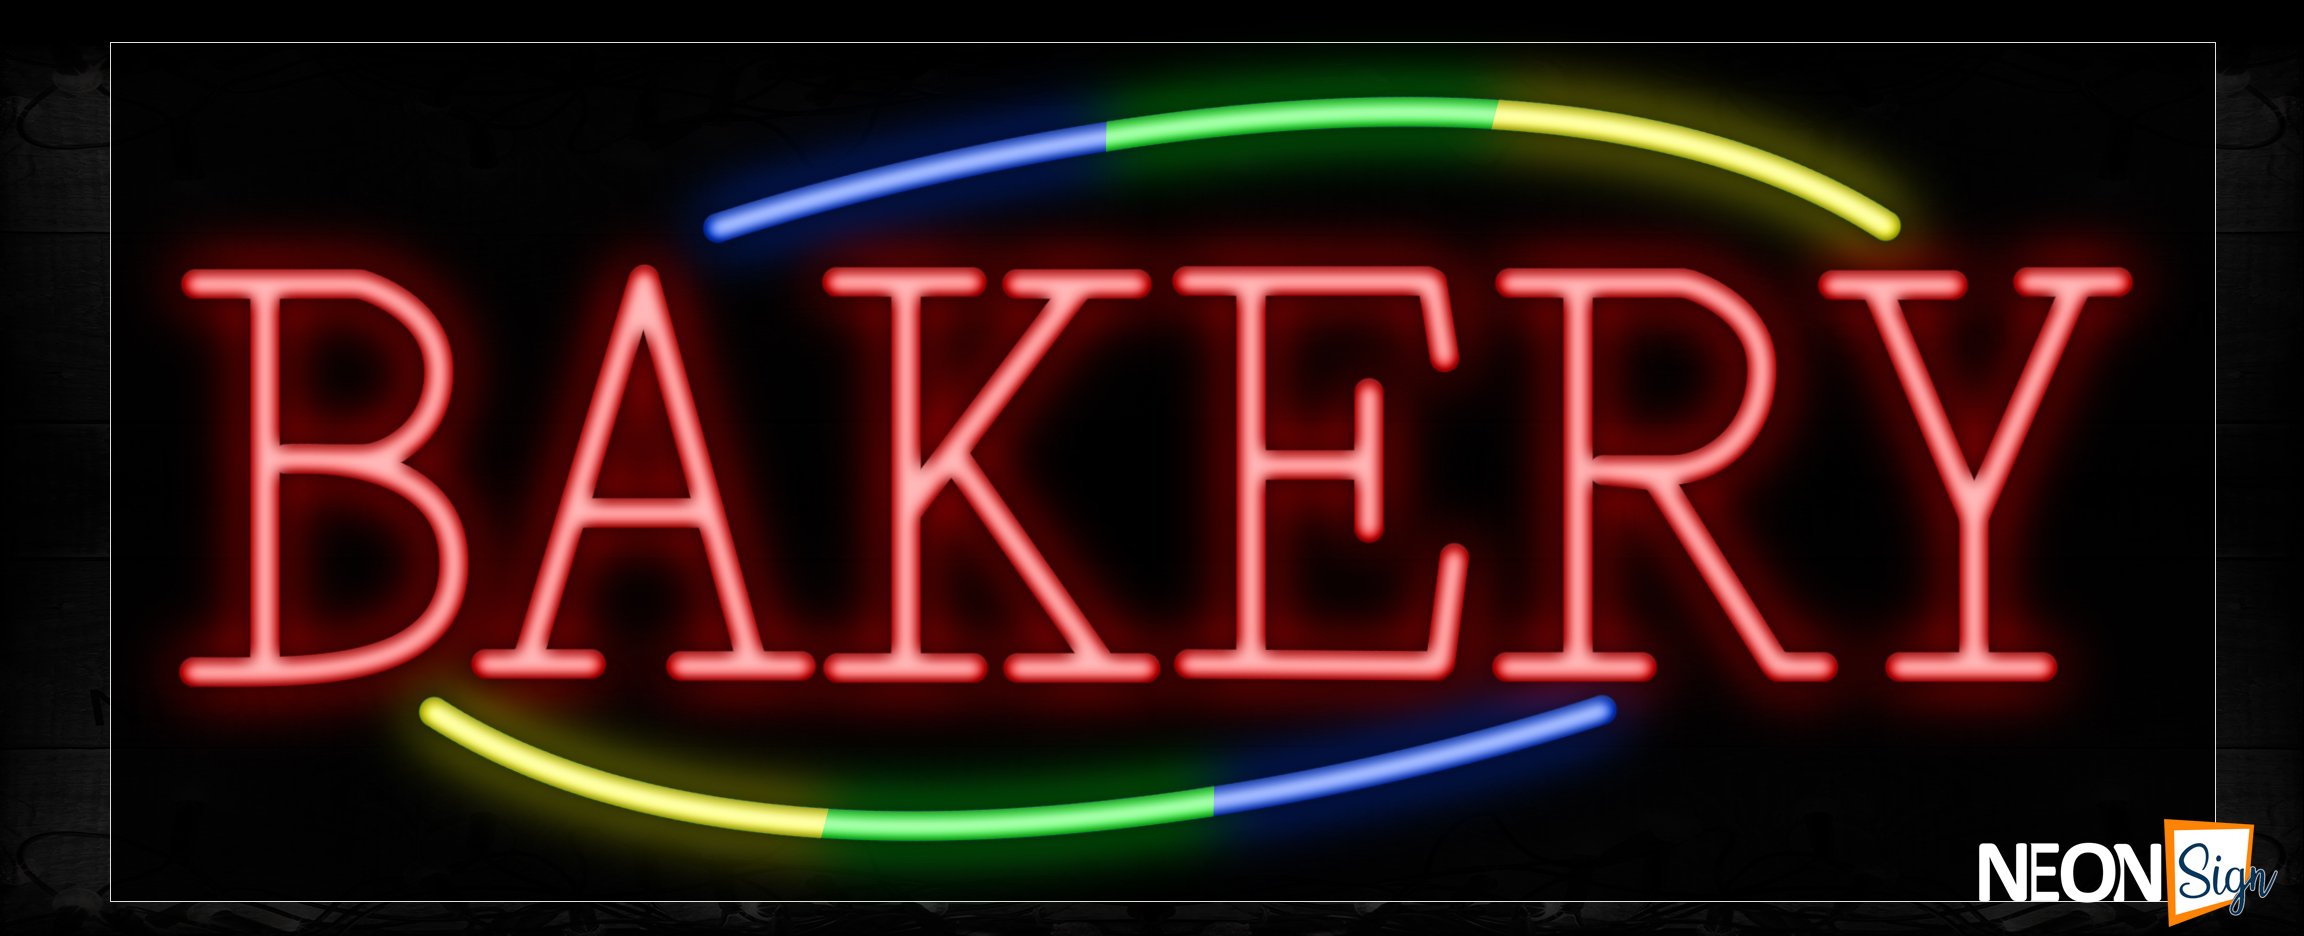 Image of 10734 Bakery in red with colorful arc border Neon Sign_13x32 Black Backing